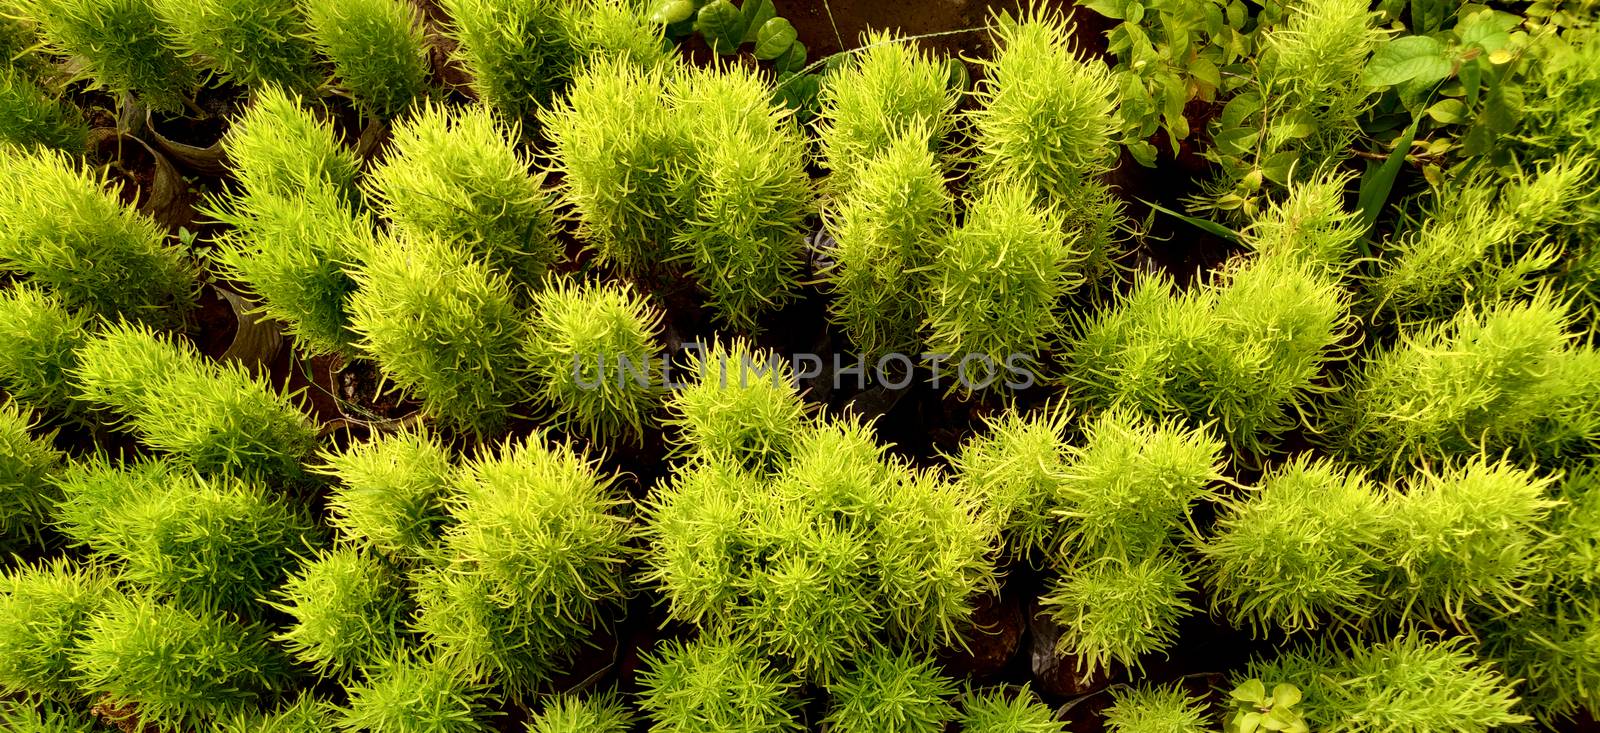 Bassia scoparia shrubs and plants from top angle by mshivangi92